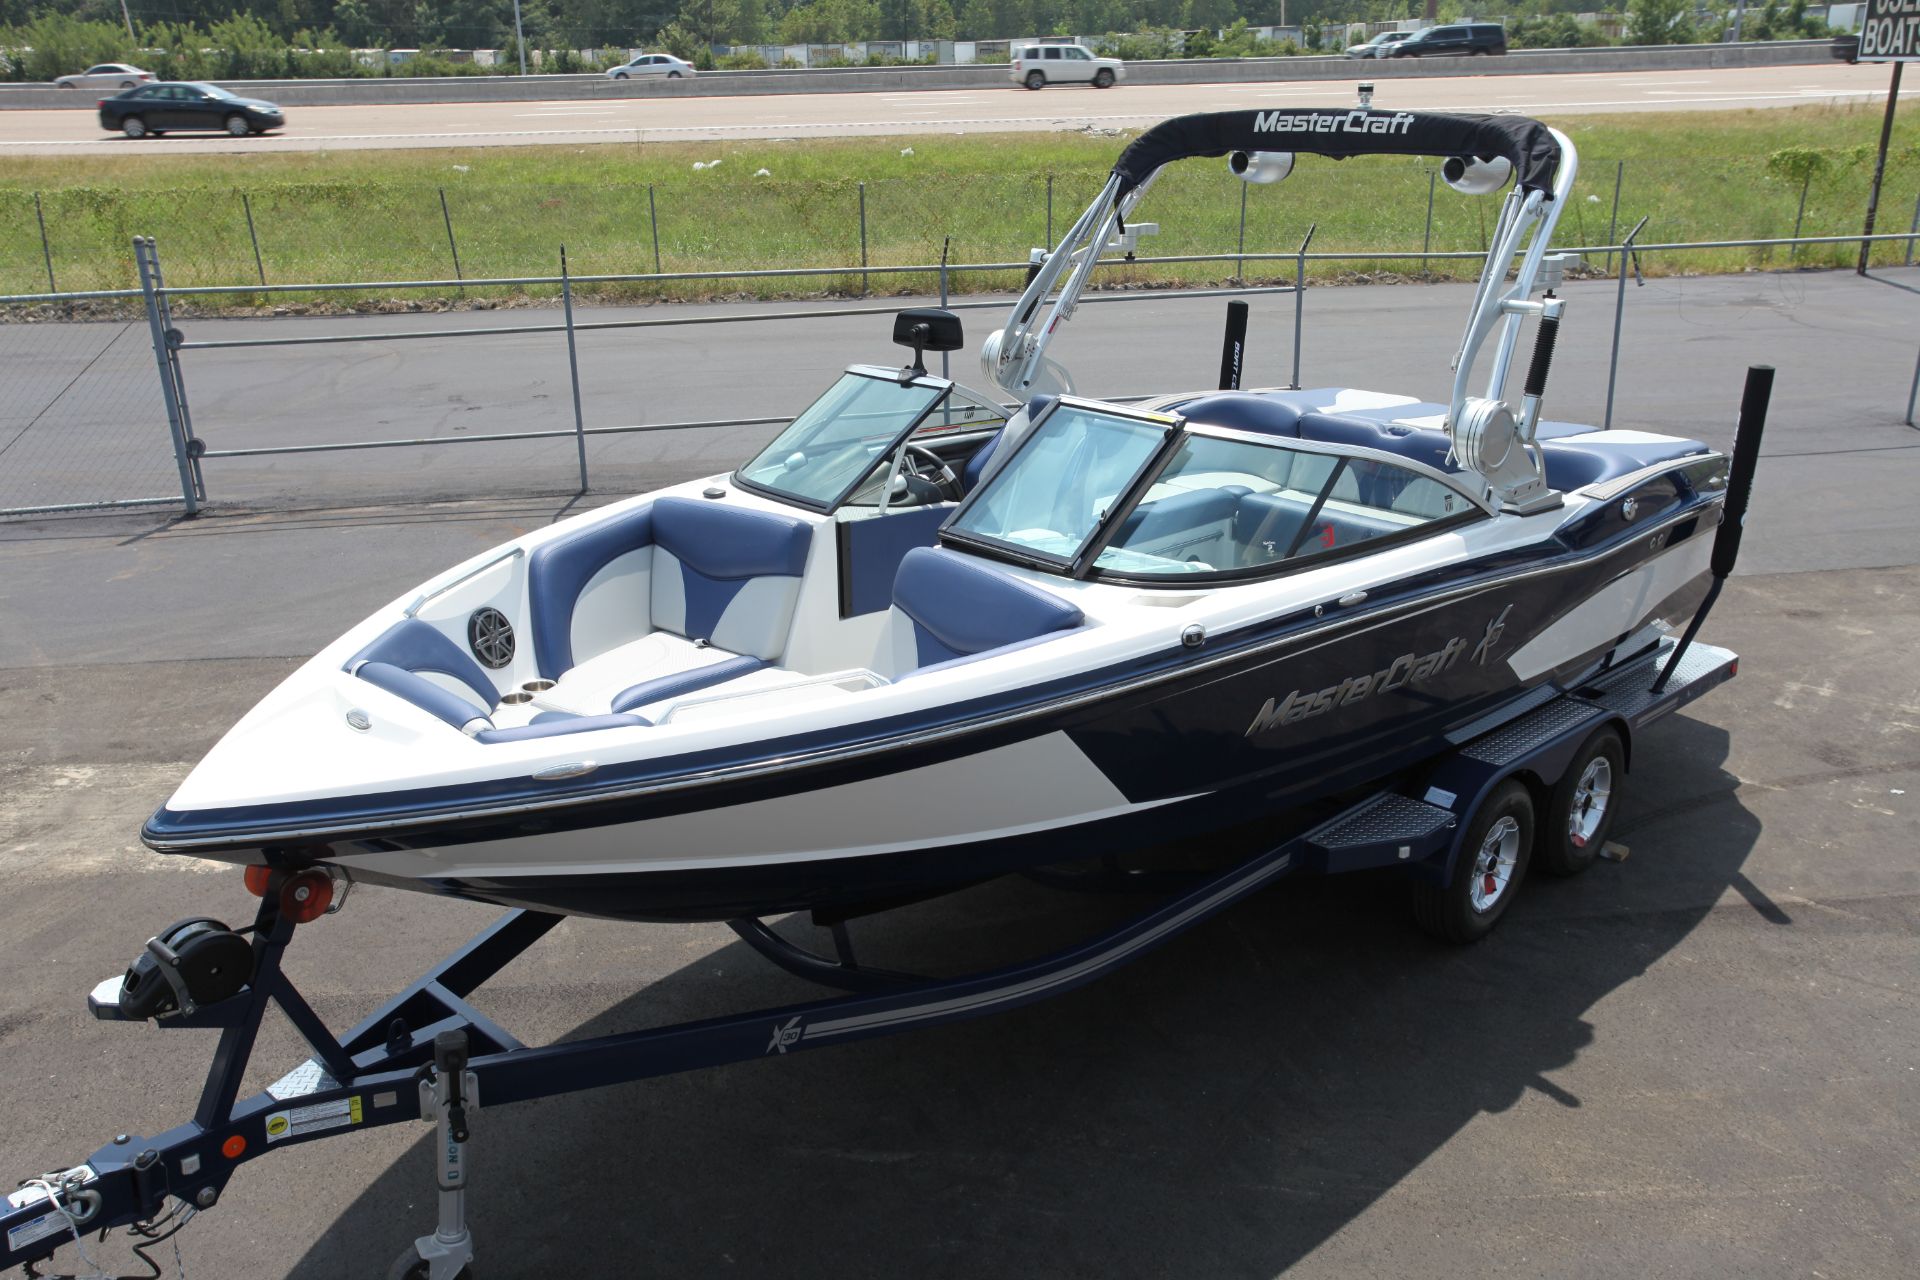 2016 Mastercraft X30 in Memphis, Tennessee - Photo 1